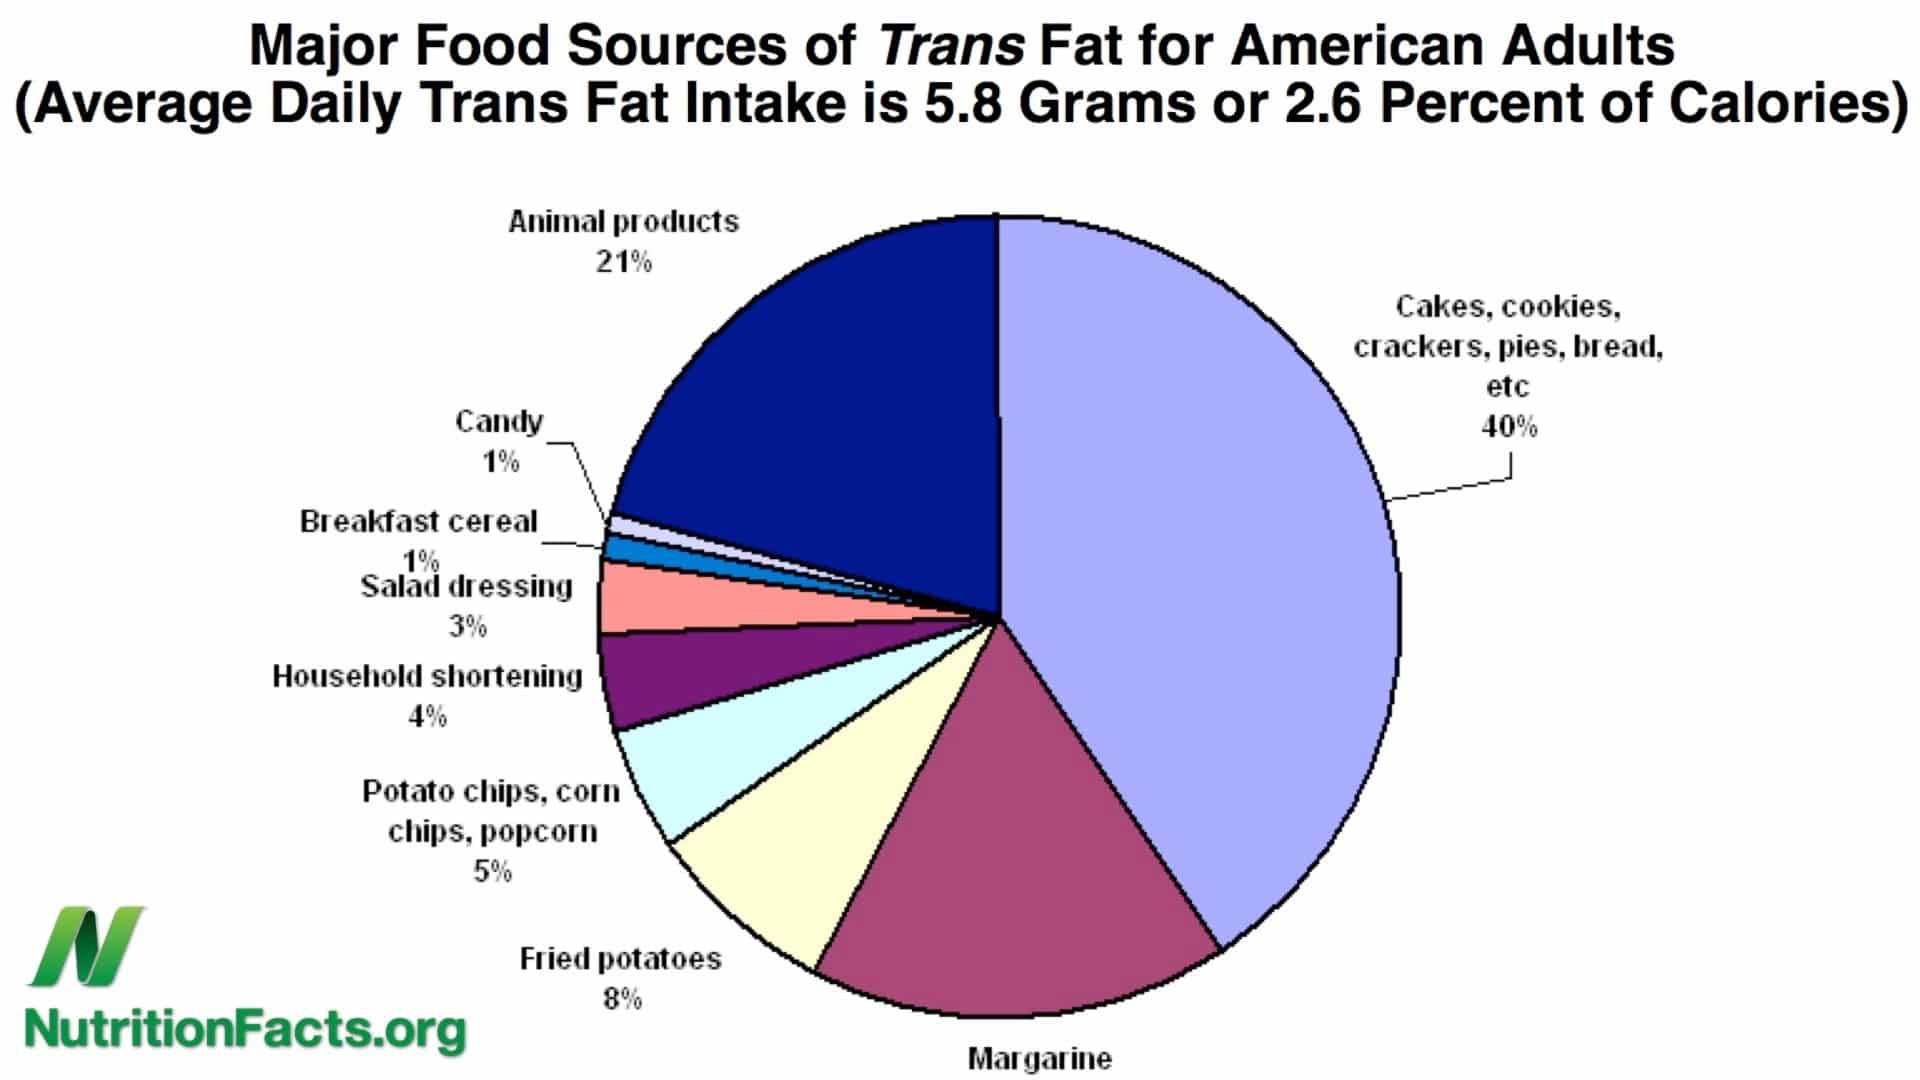 Trans fat, saturated fat, and cholesterol- Tolerable upper intake of zero